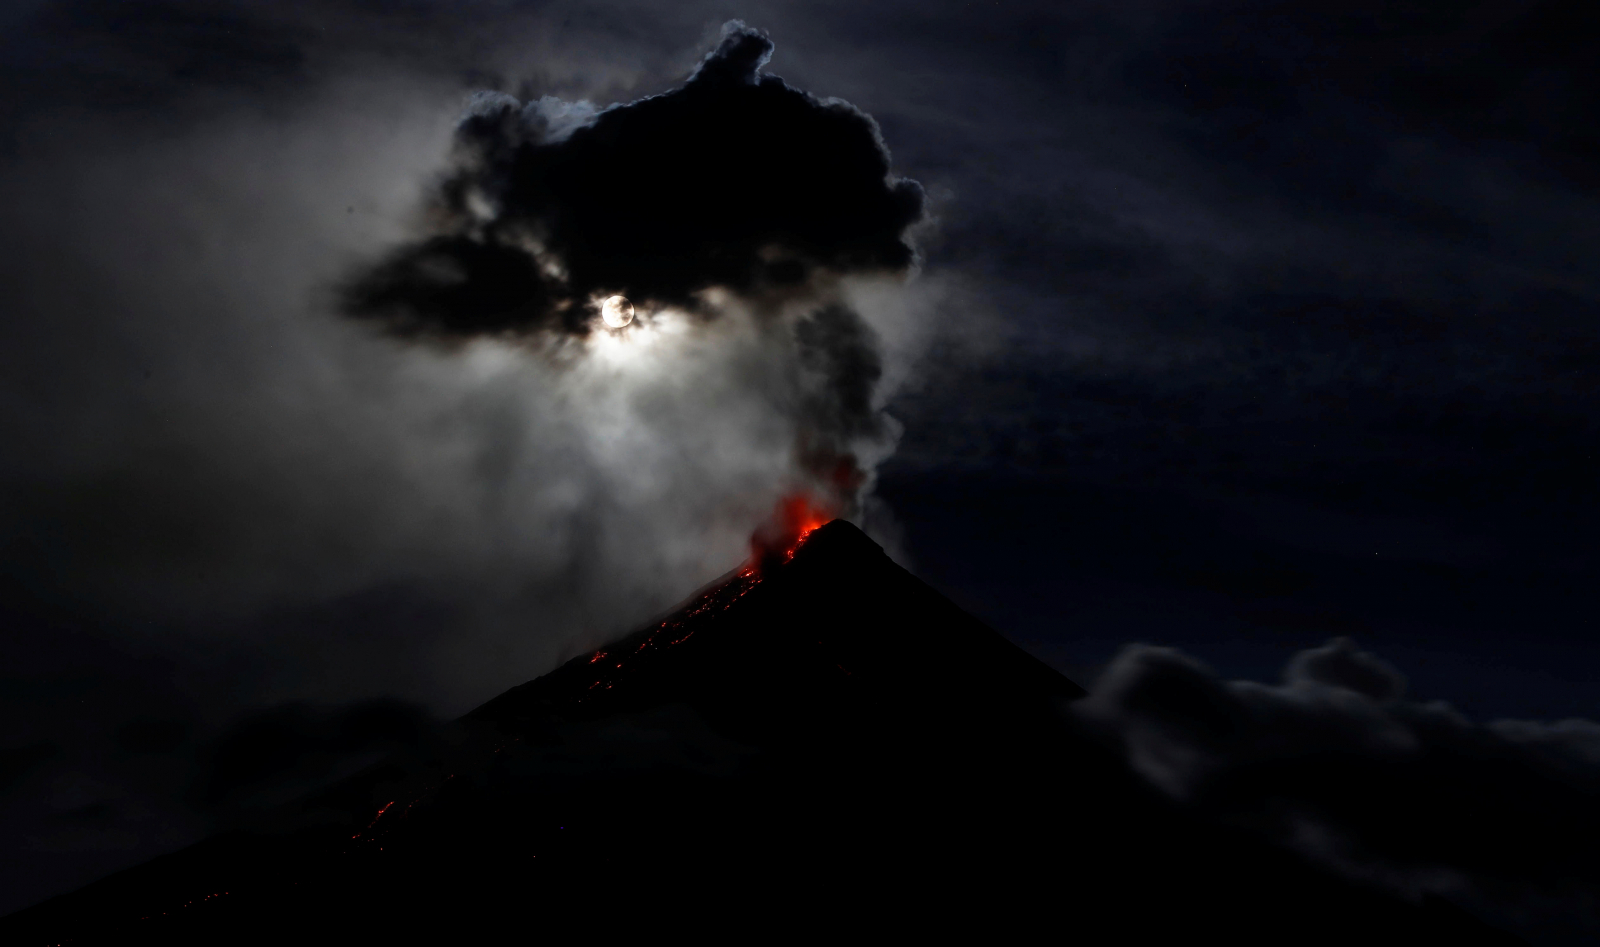 Philippines Check Out Breathtaking Images Of Volcanic Eruption In